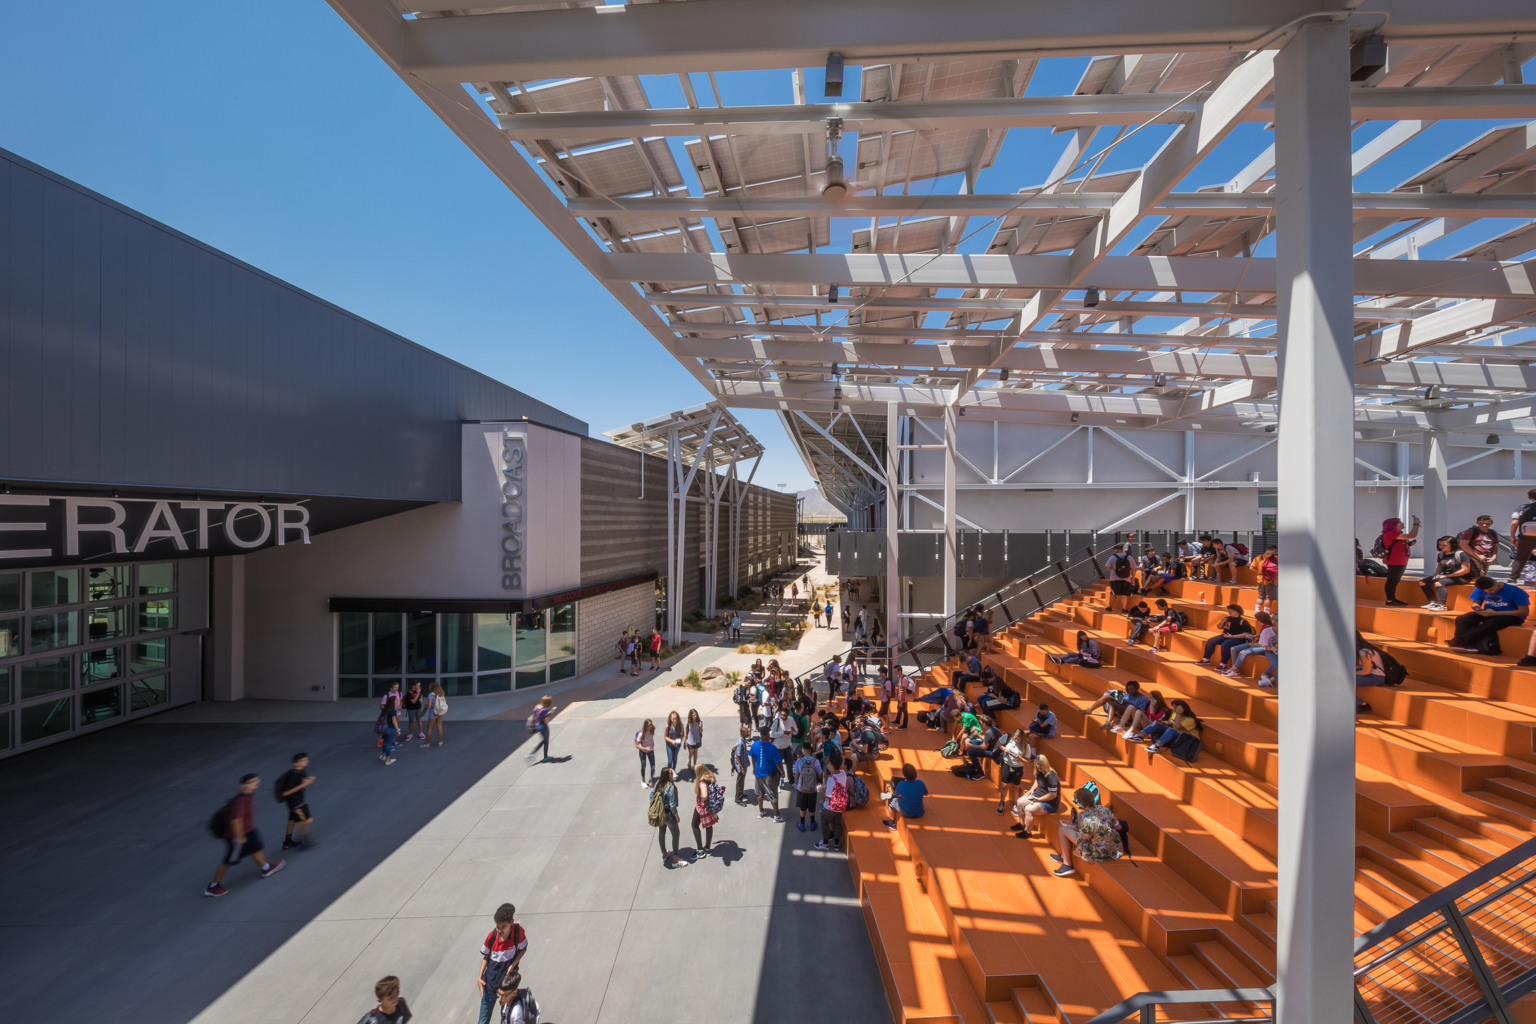 orange bleacher seating shaded by a solar panel canopy